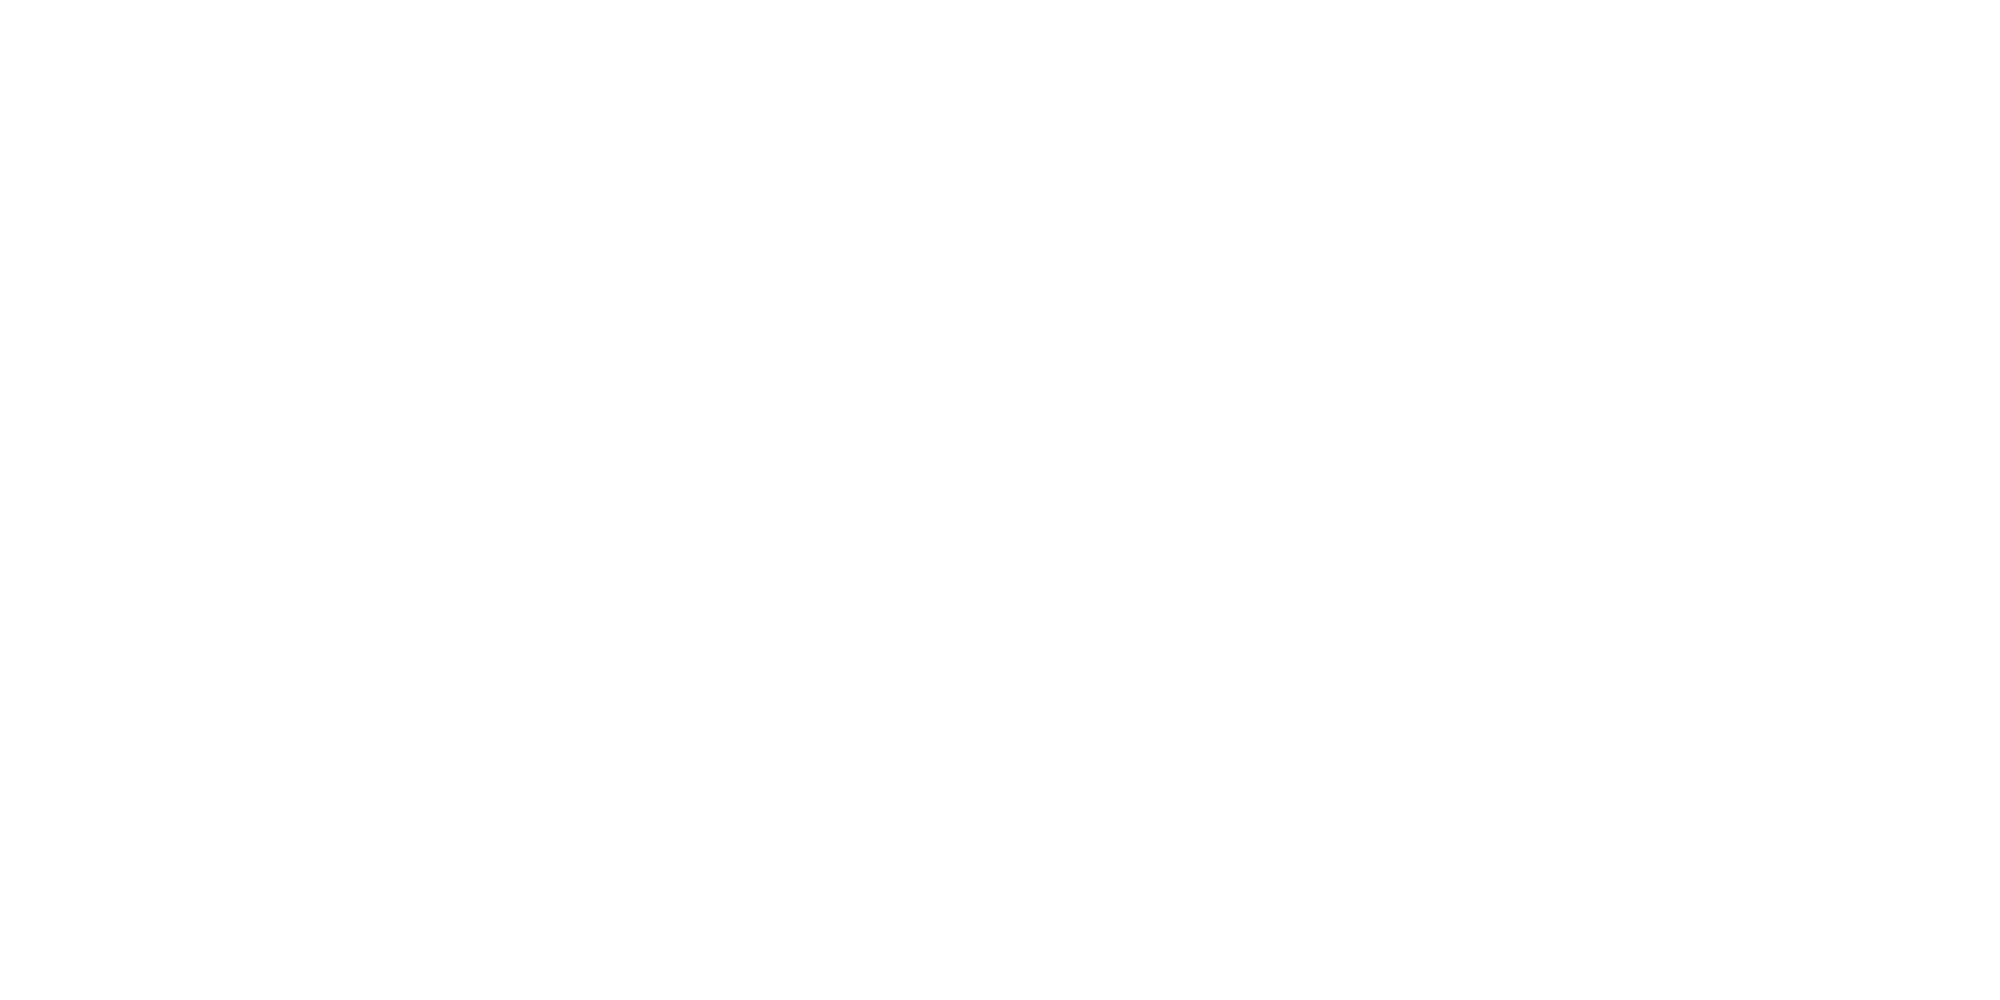 WE ARE ALL GODS